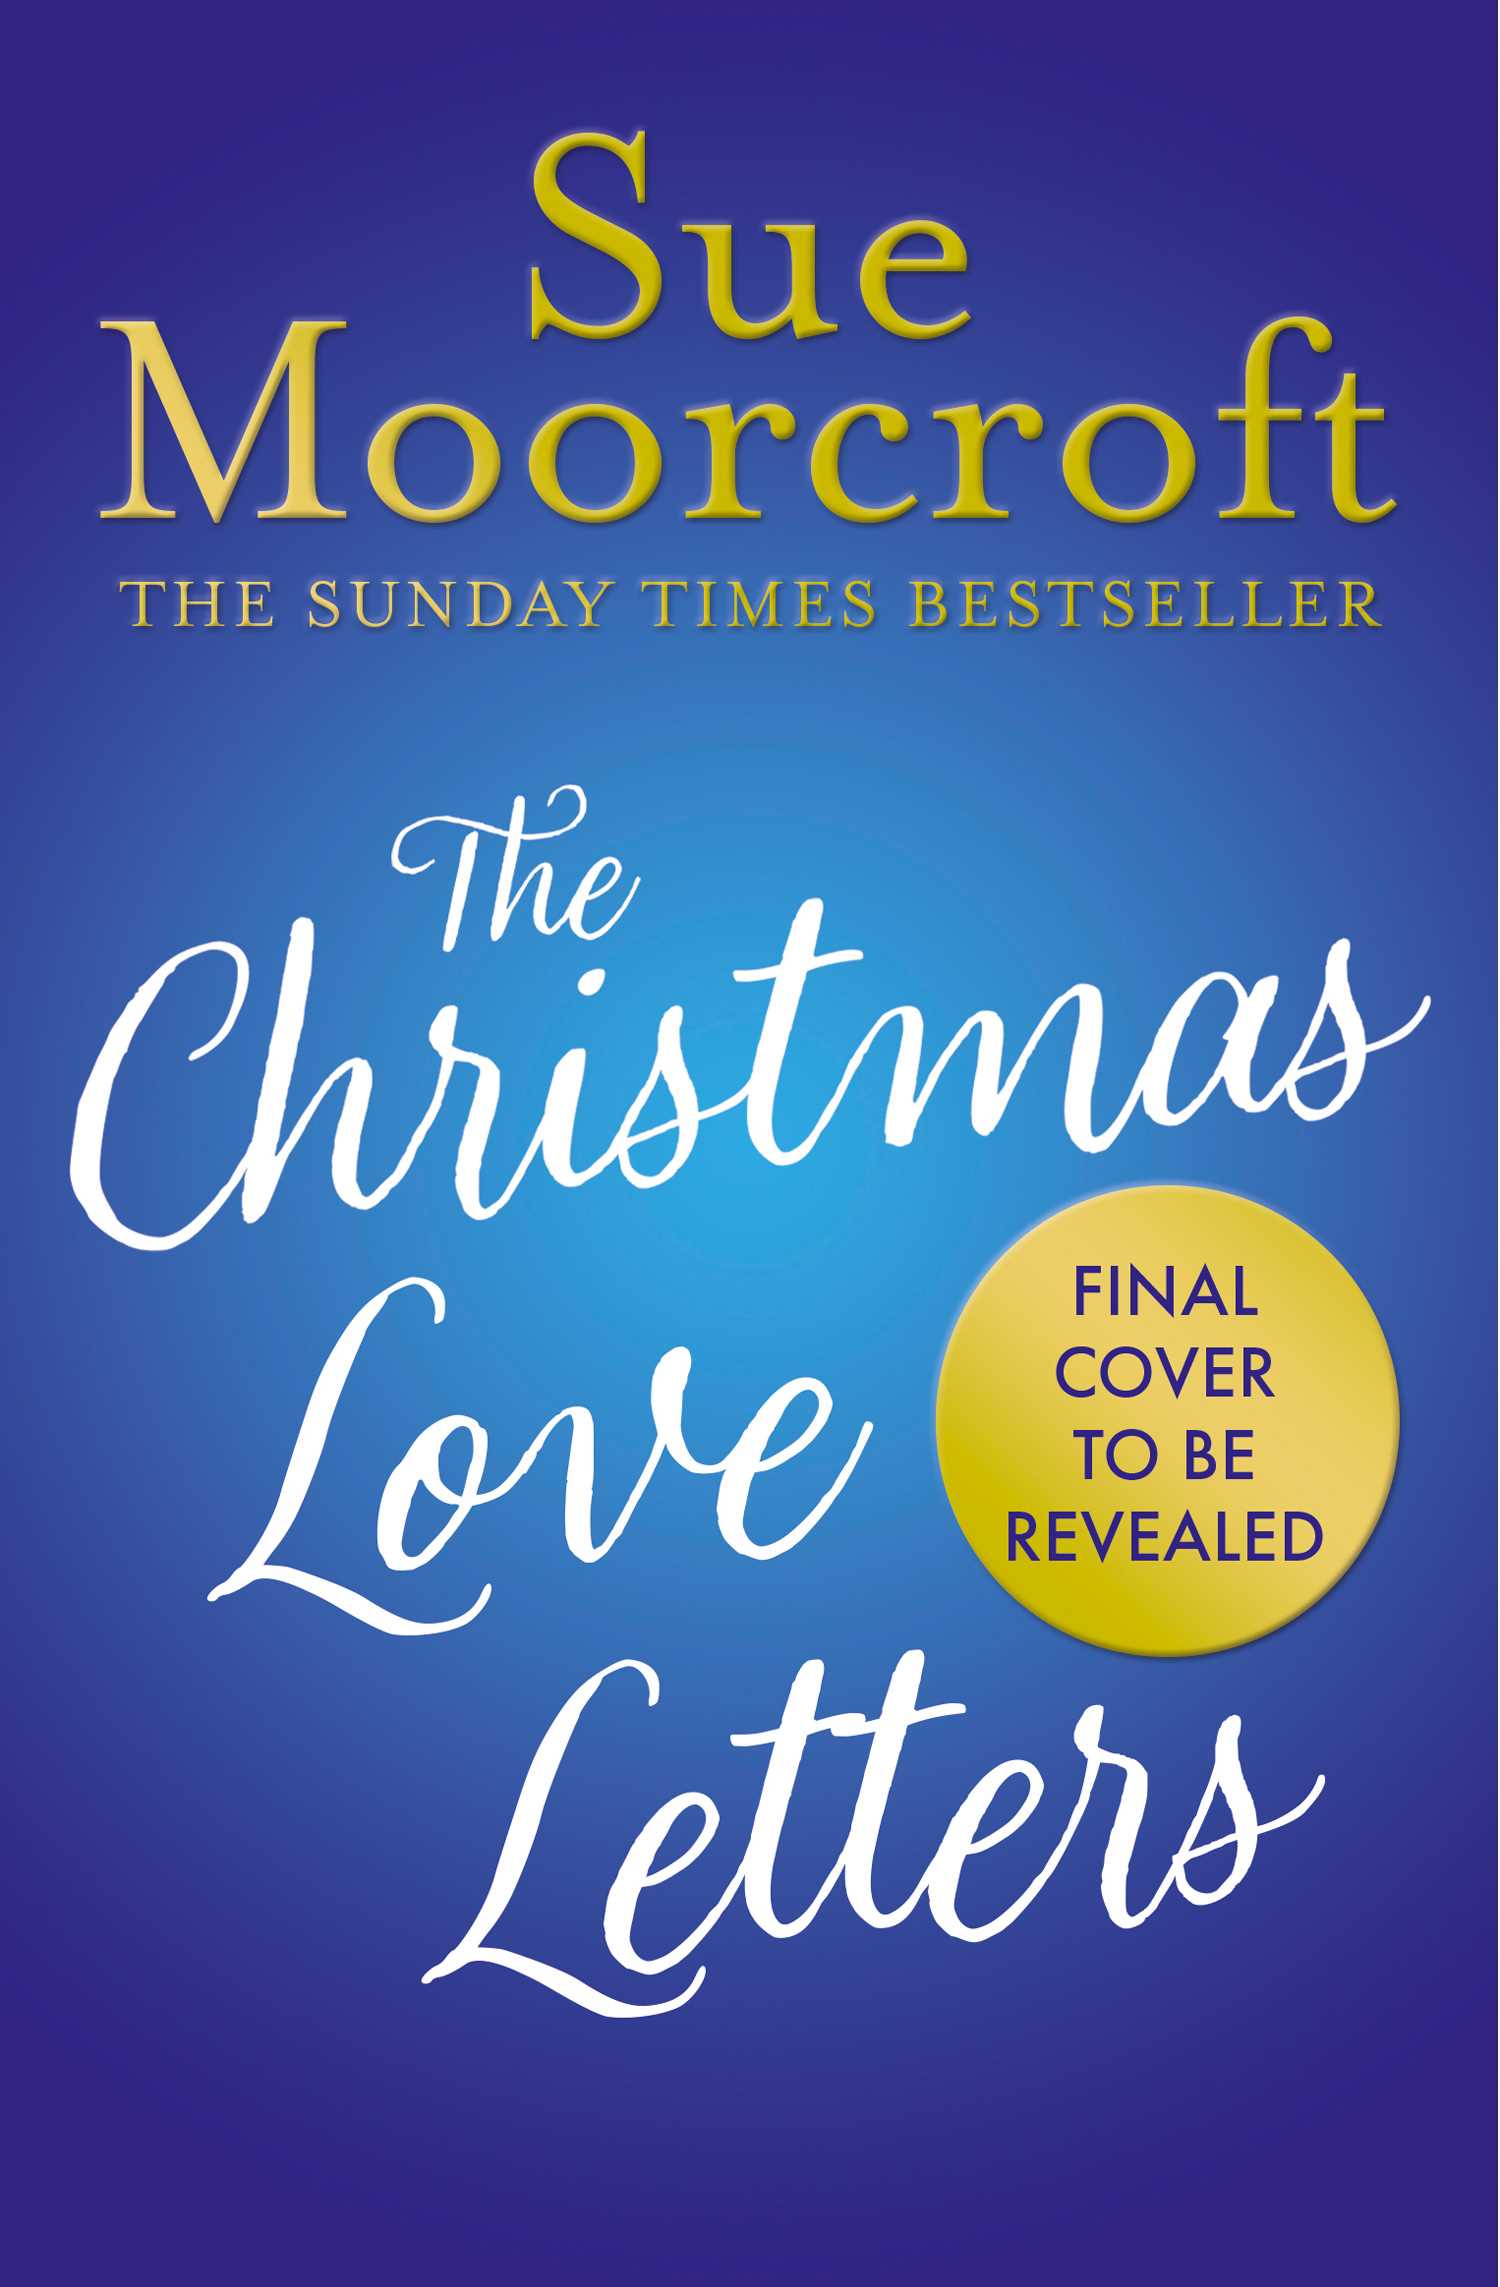 The Christmas Love Letters